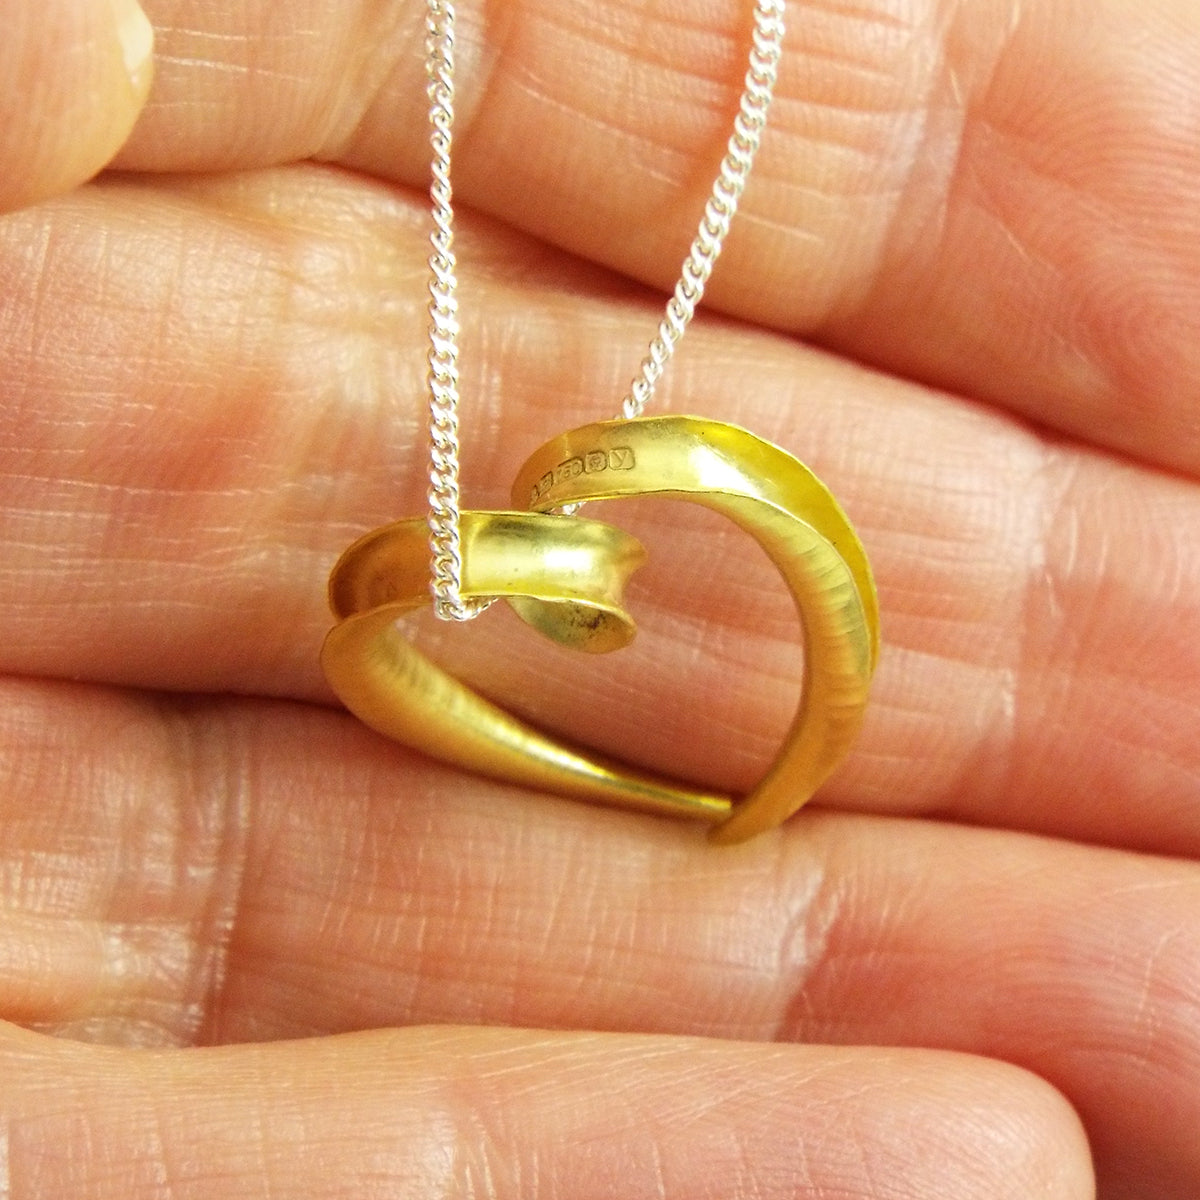 A small 18 carat heart pendant made from a single piece of metal, formed into a sort of tapered tube with the outer side open and gold plated on the inside surface for contrast. It is formed into a loop at the top which the chain passes through. Shown in the hand for scale and to display the hallmark.